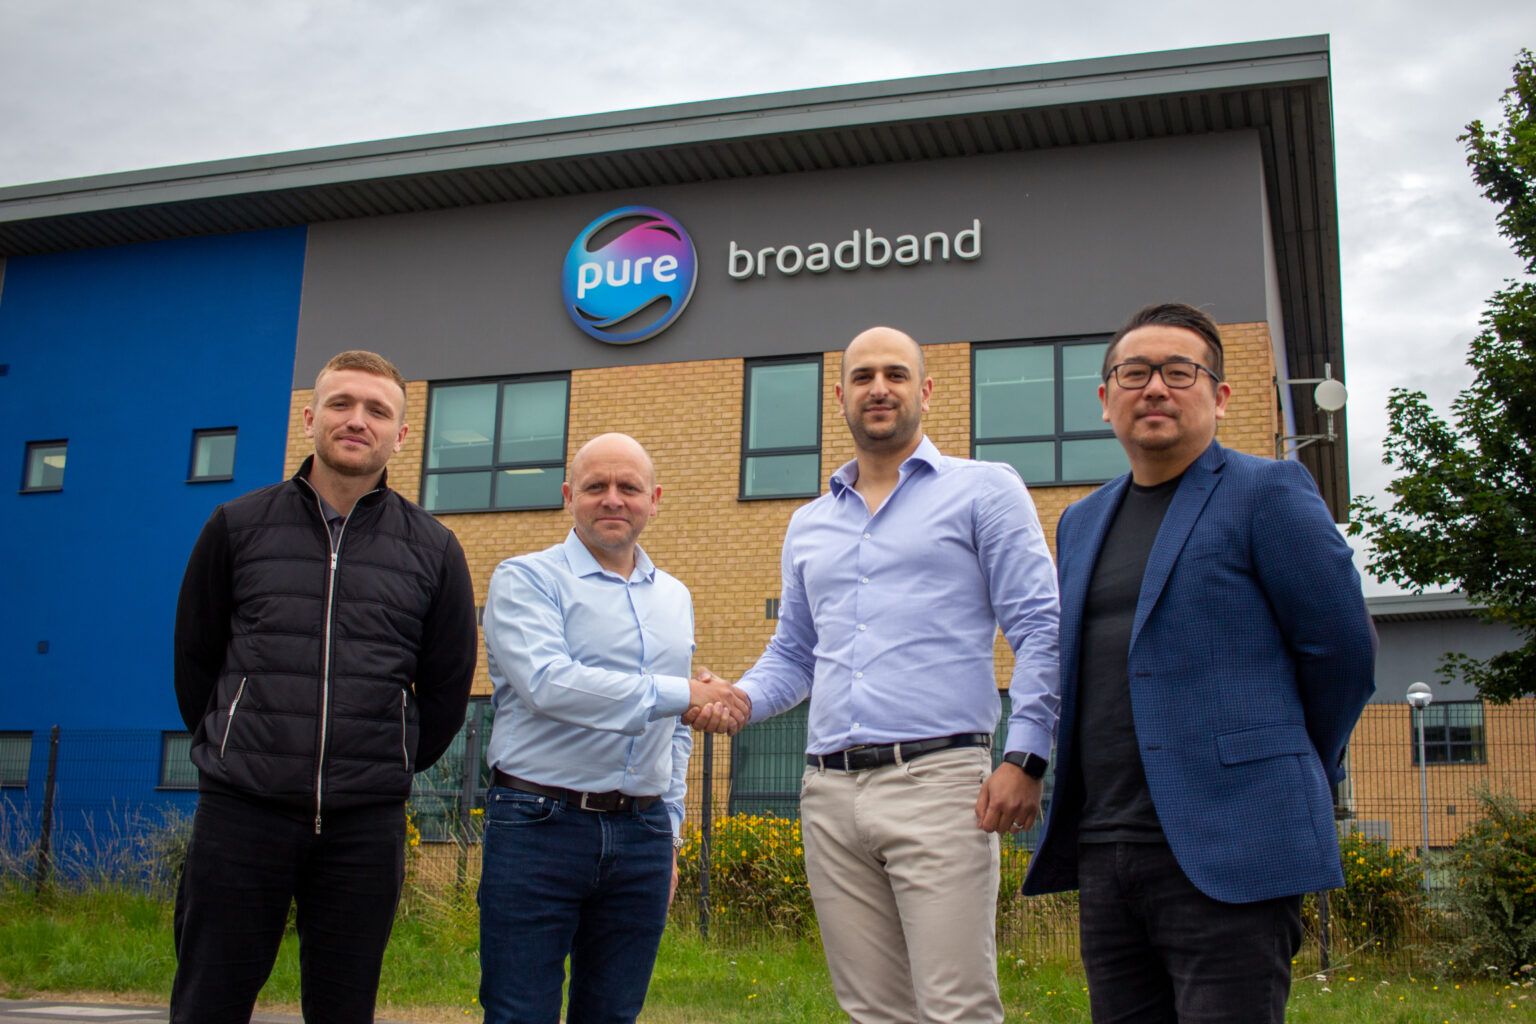 Furqan and Alex shaking hands with Pure Broadband owners in order to acquire the company